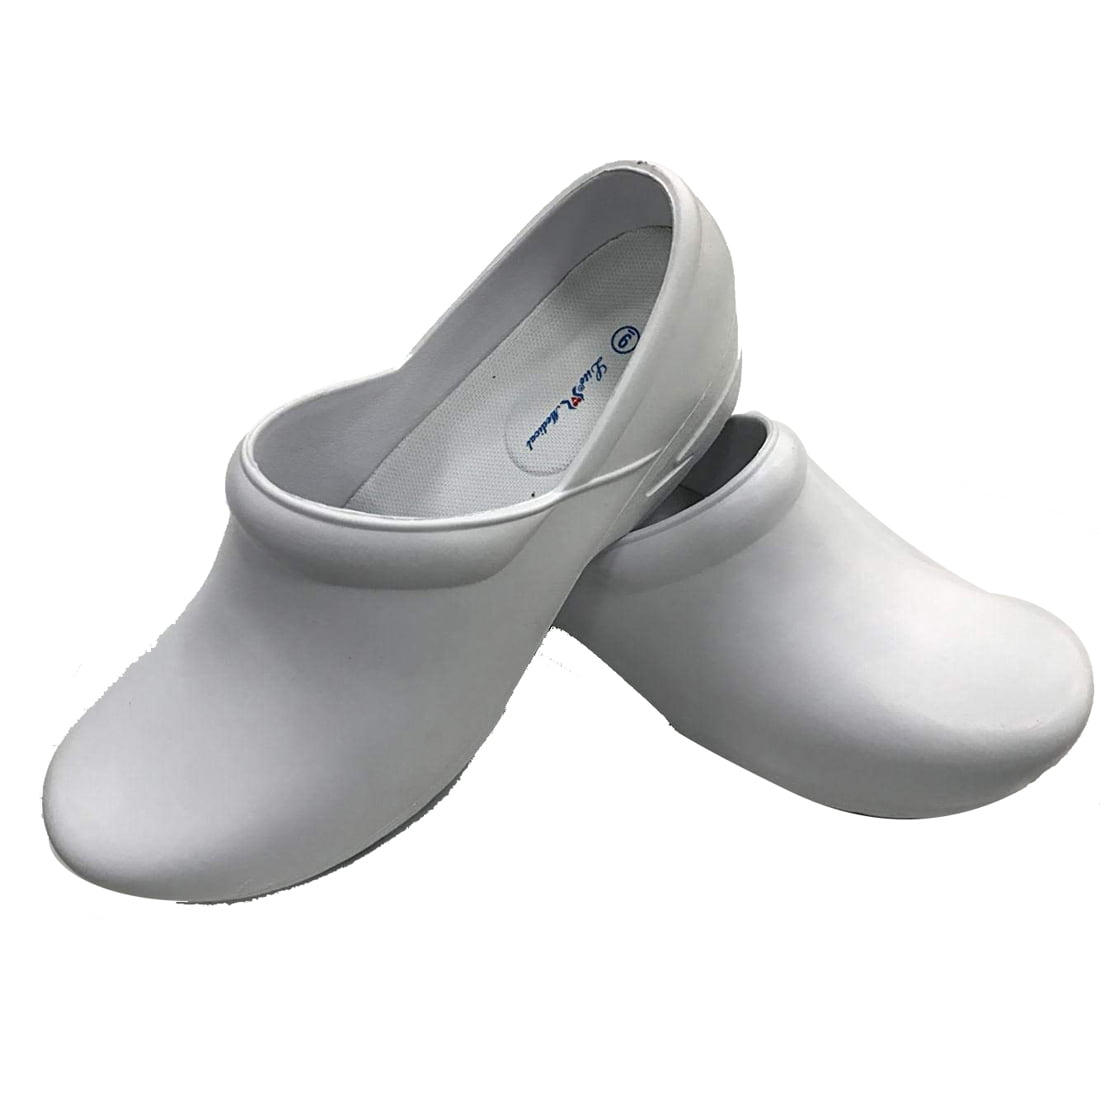 Details about   Womens Slip Resistant Breathable Nurse Hospital Shoes Slip on Loafers Gommino SZ